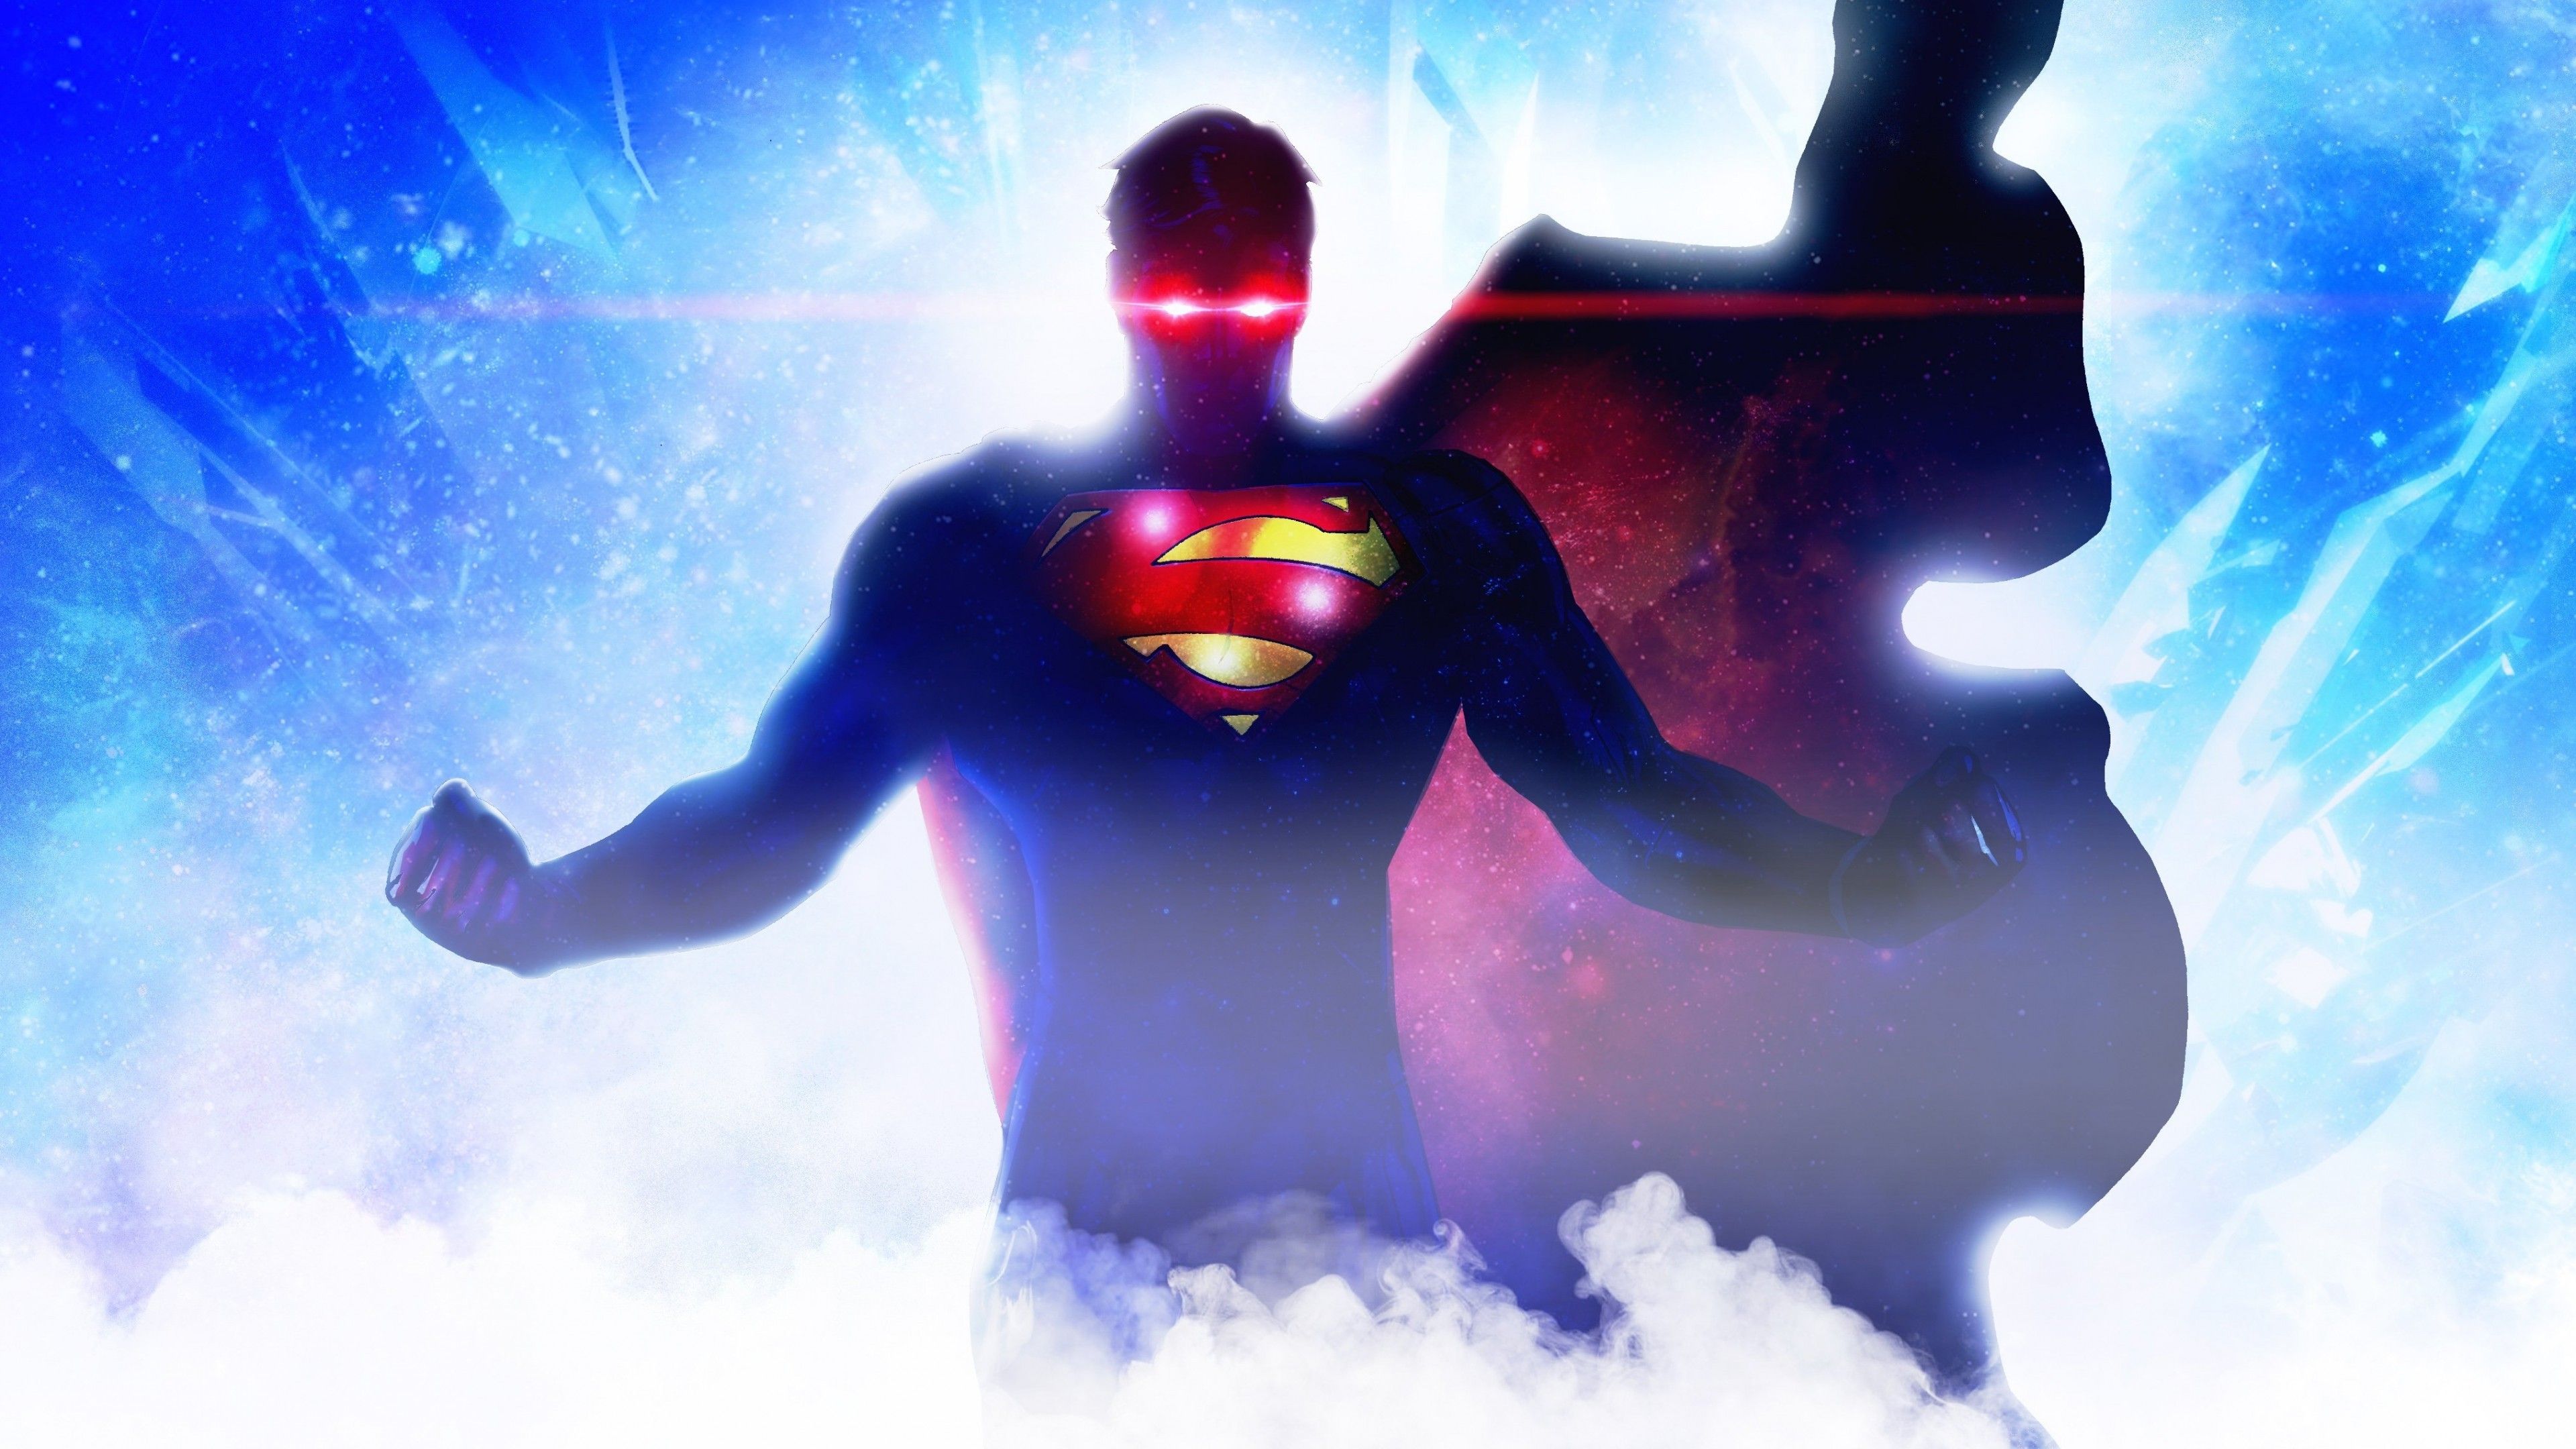 Download 3840x2160 Superman, Artwork, Red Eyes, Cape Wallpaper for UHD TV